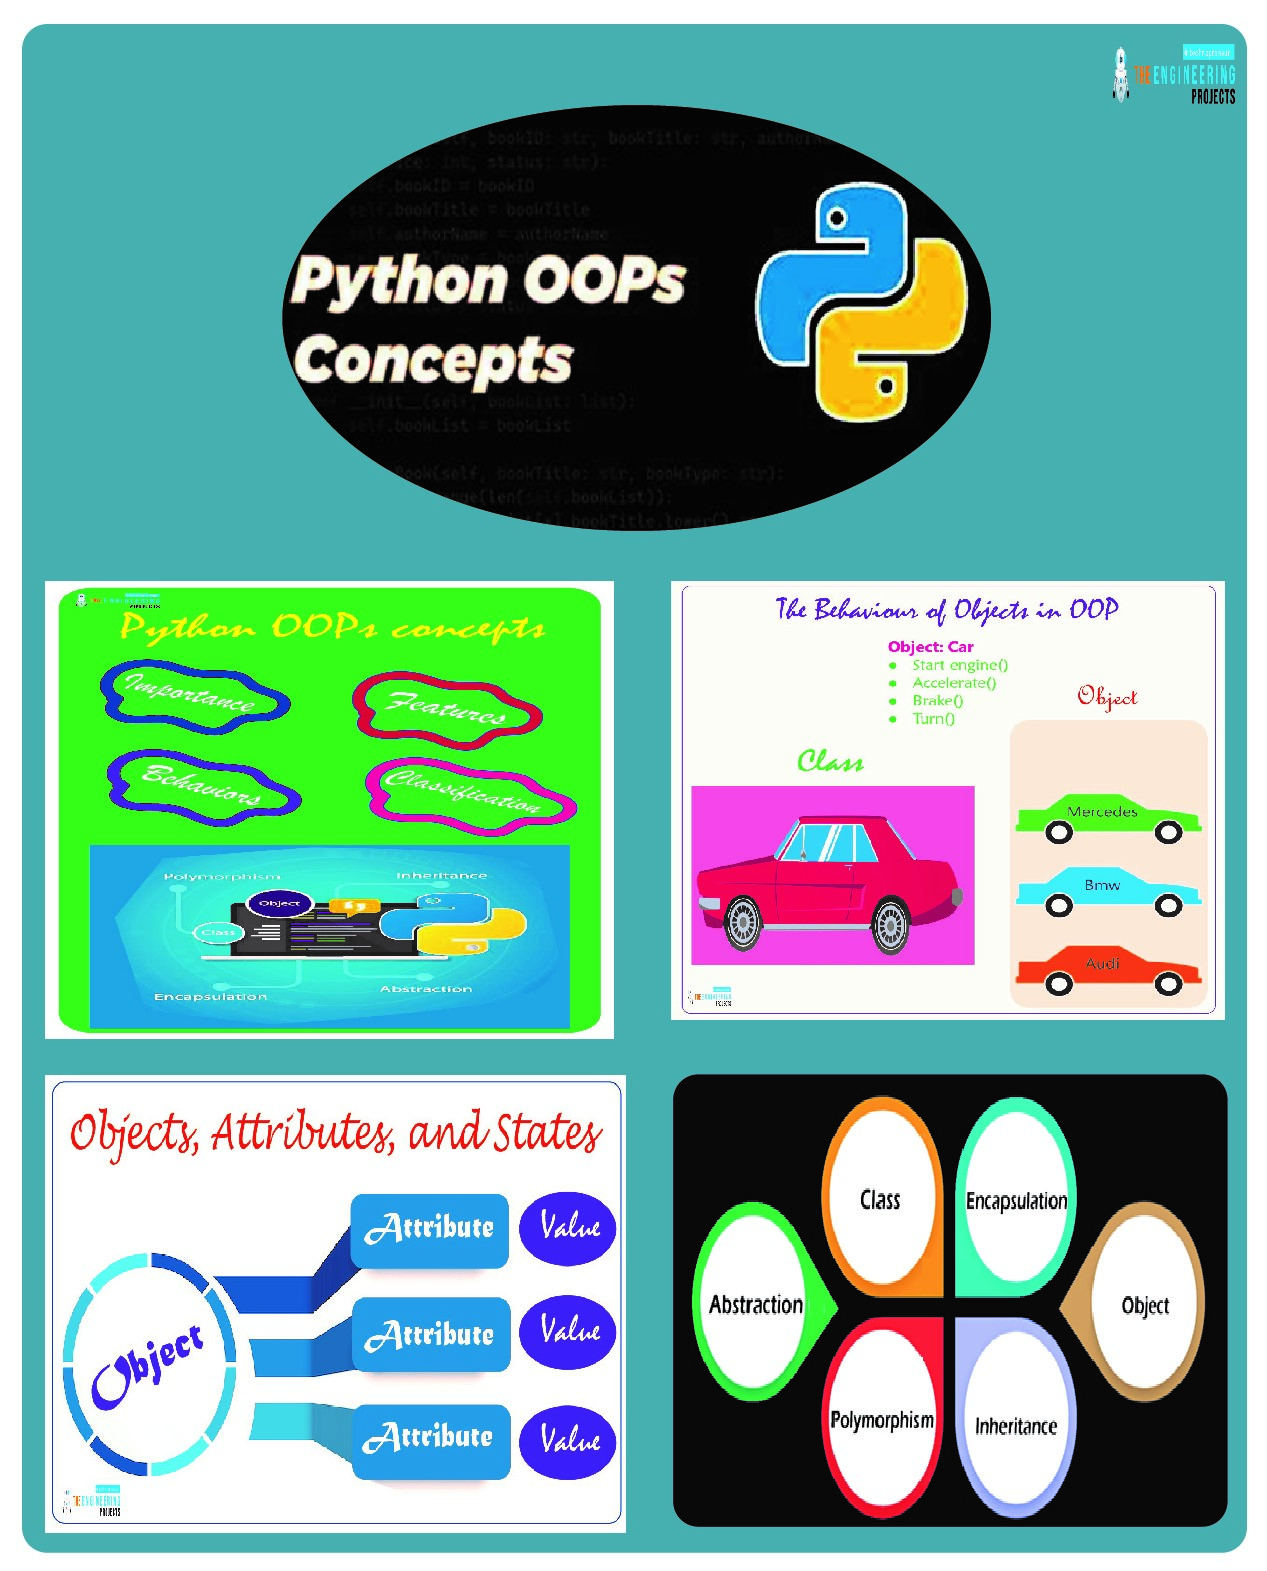 Classes and Objects in OOP With Python, classes in python, python classes, python objects, objects in python python classes, classes in python, python class, class python